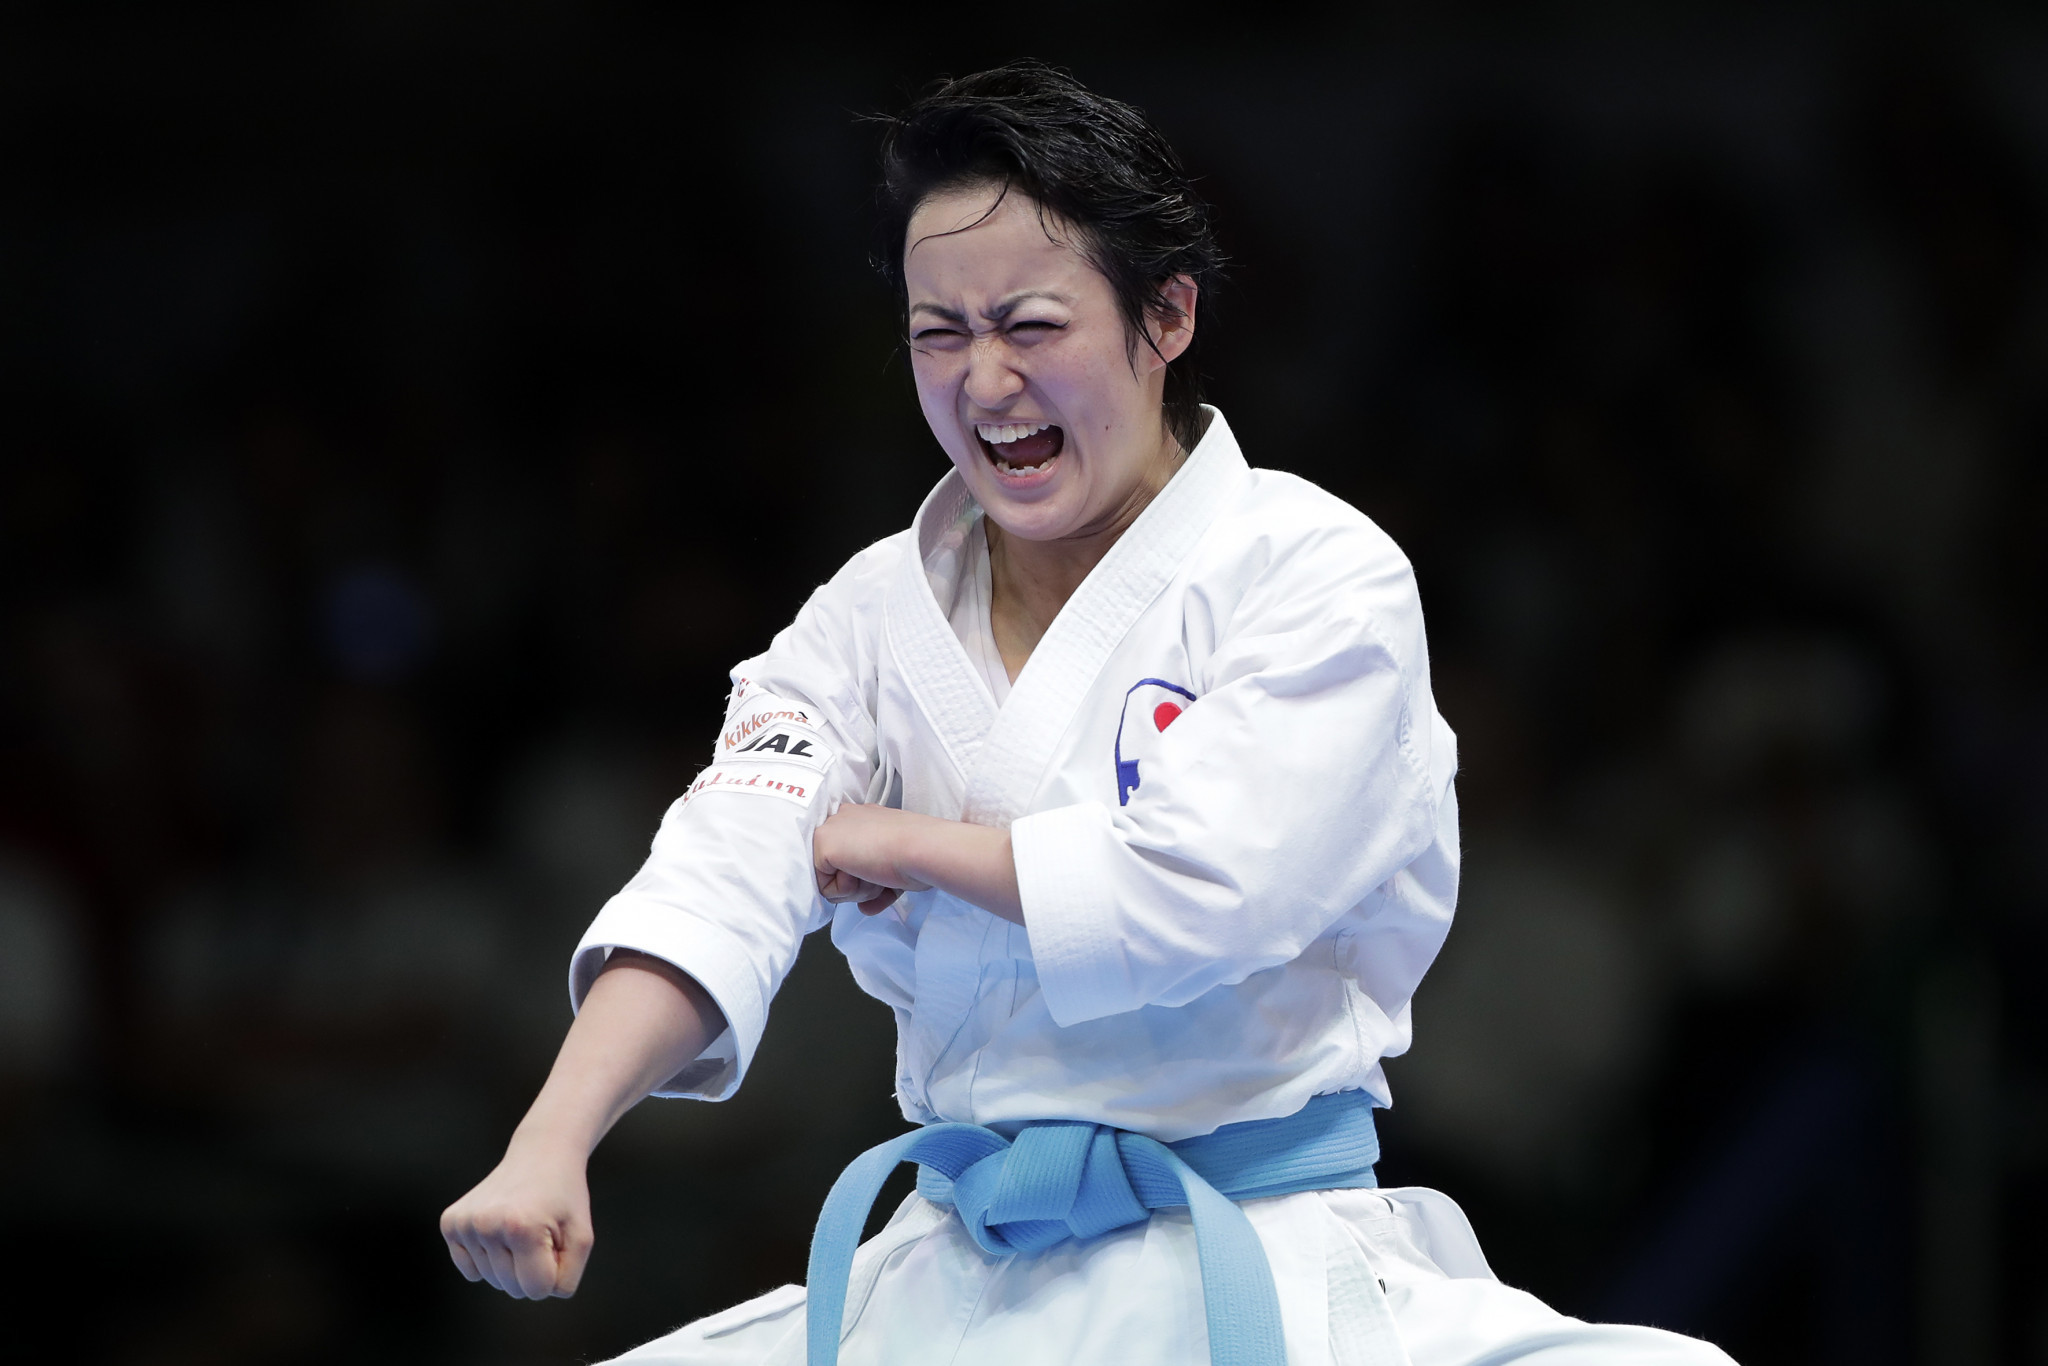 Karate star Shimizu joins campaign to inspire following Tokyo 2020 delay